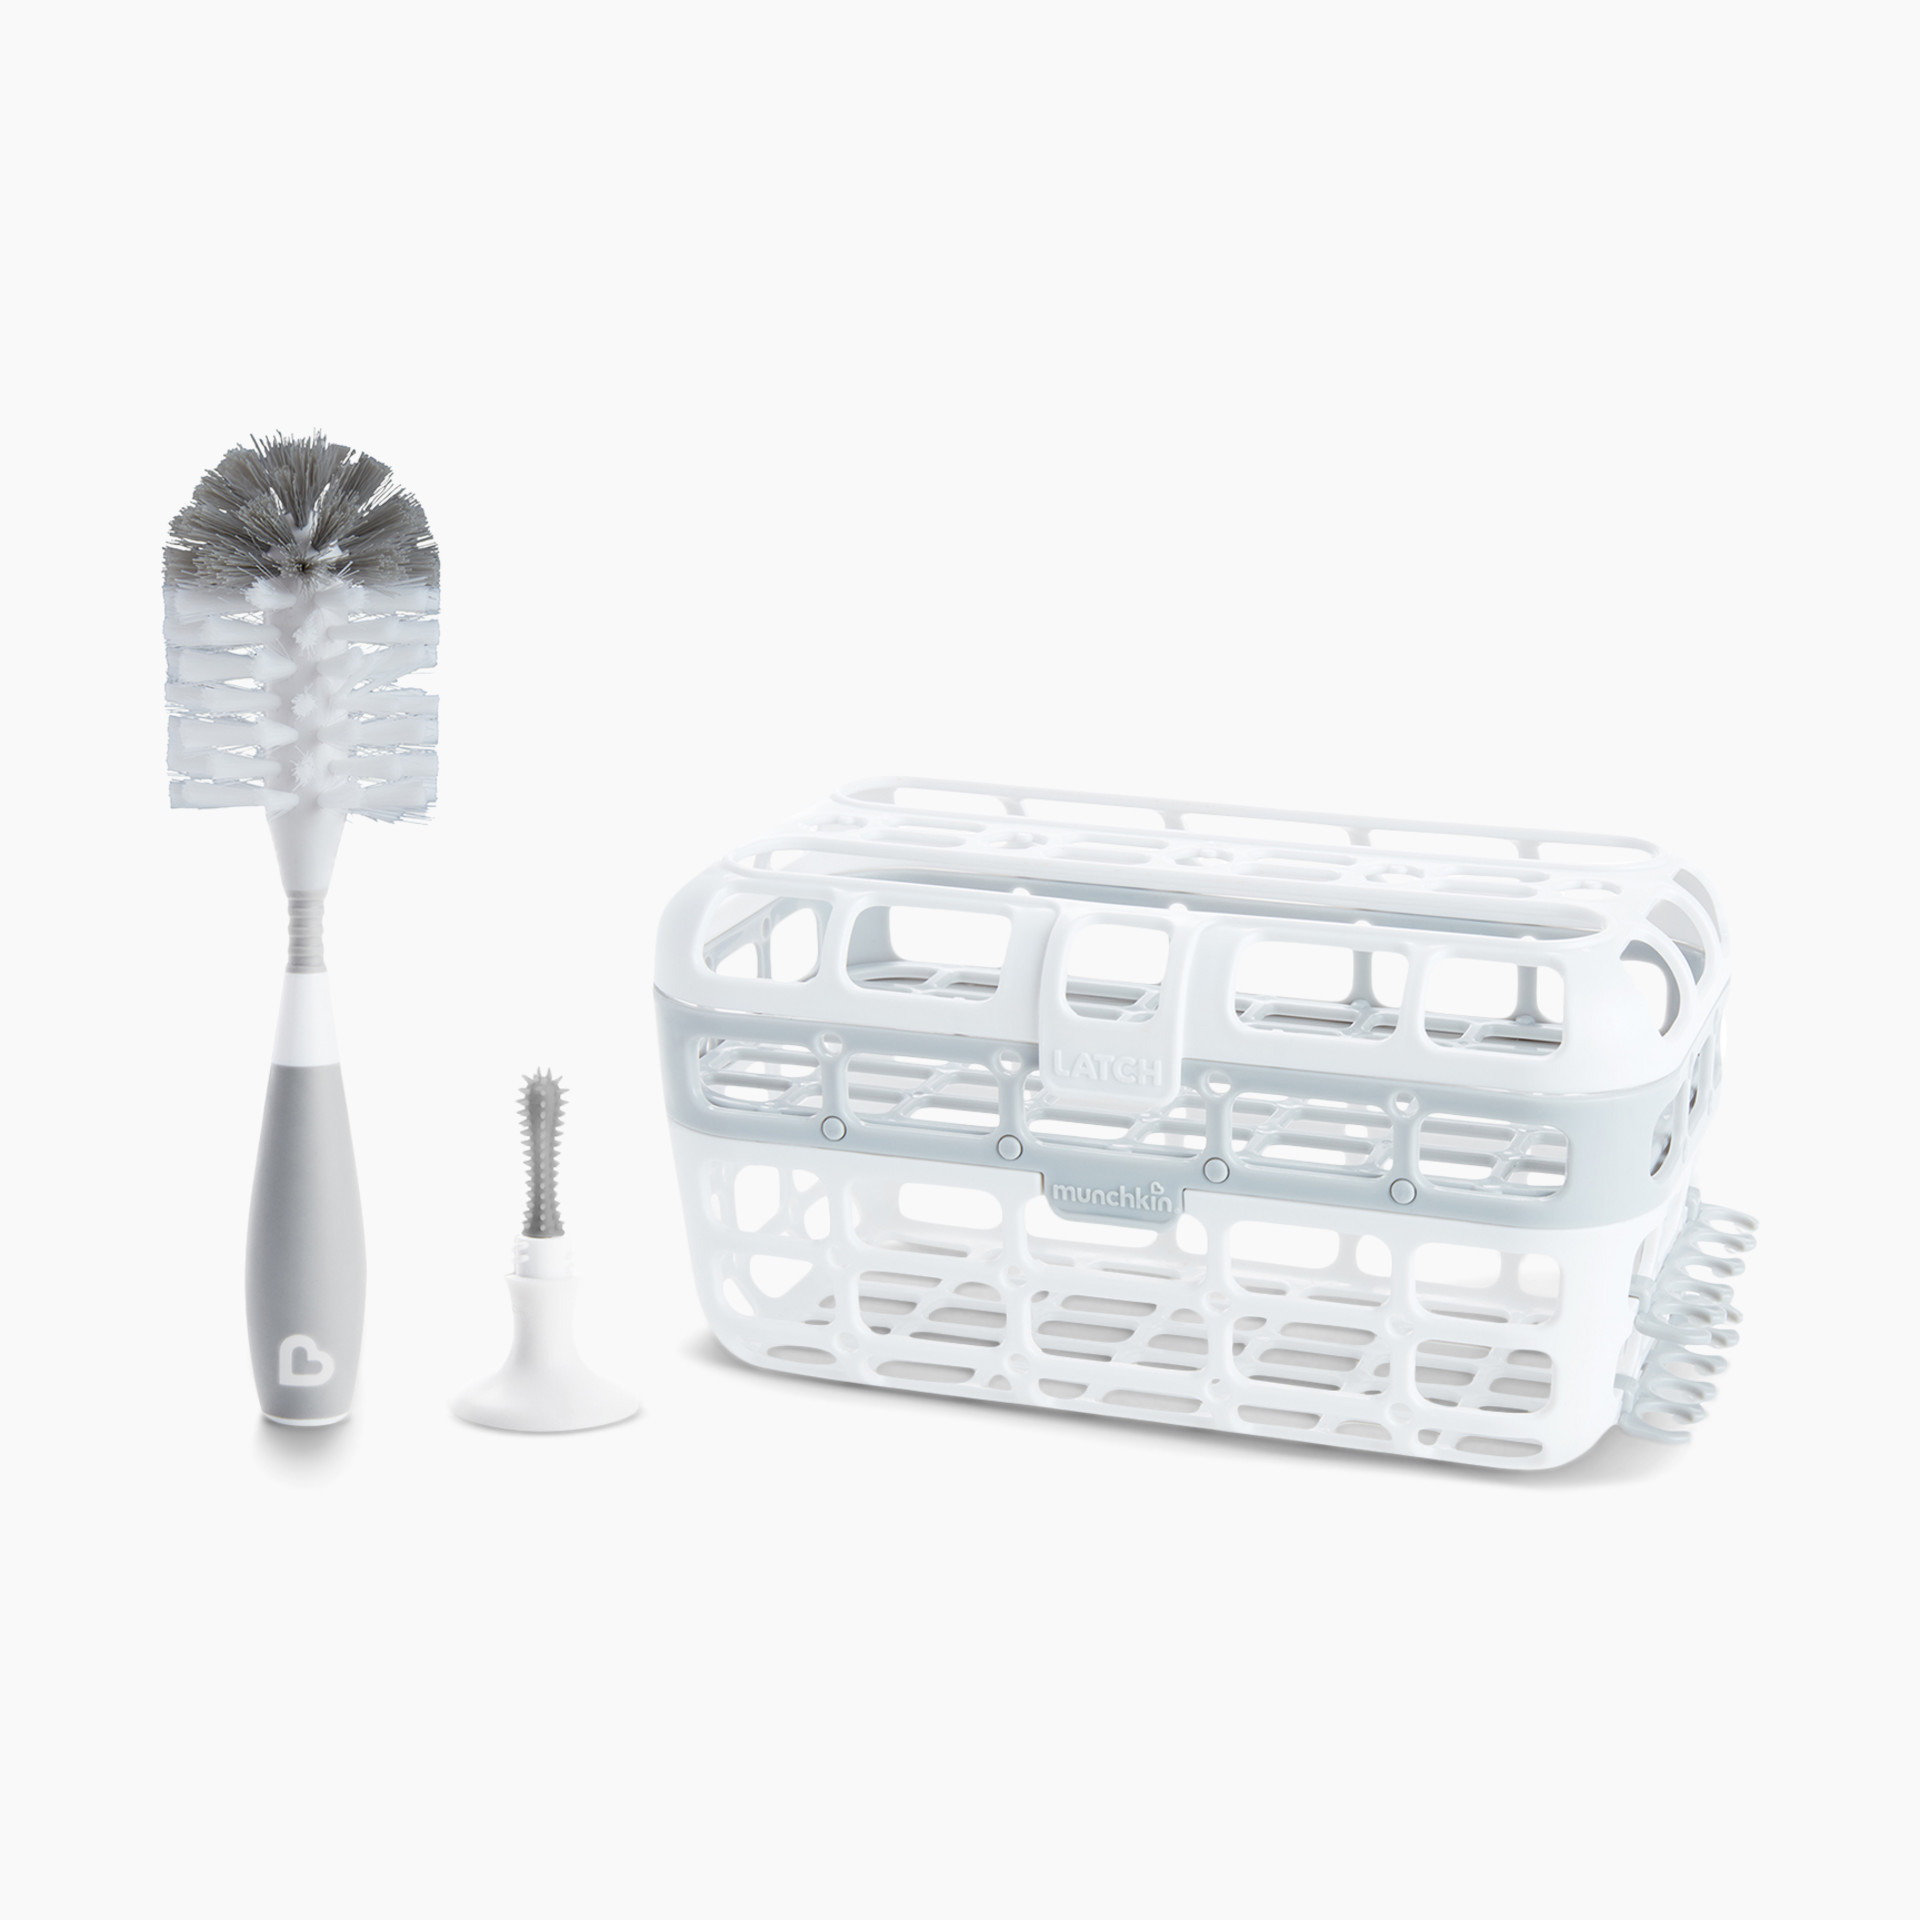 Munchkin Baby Bottle & Small Parts Cleaning Set - Grey, 1